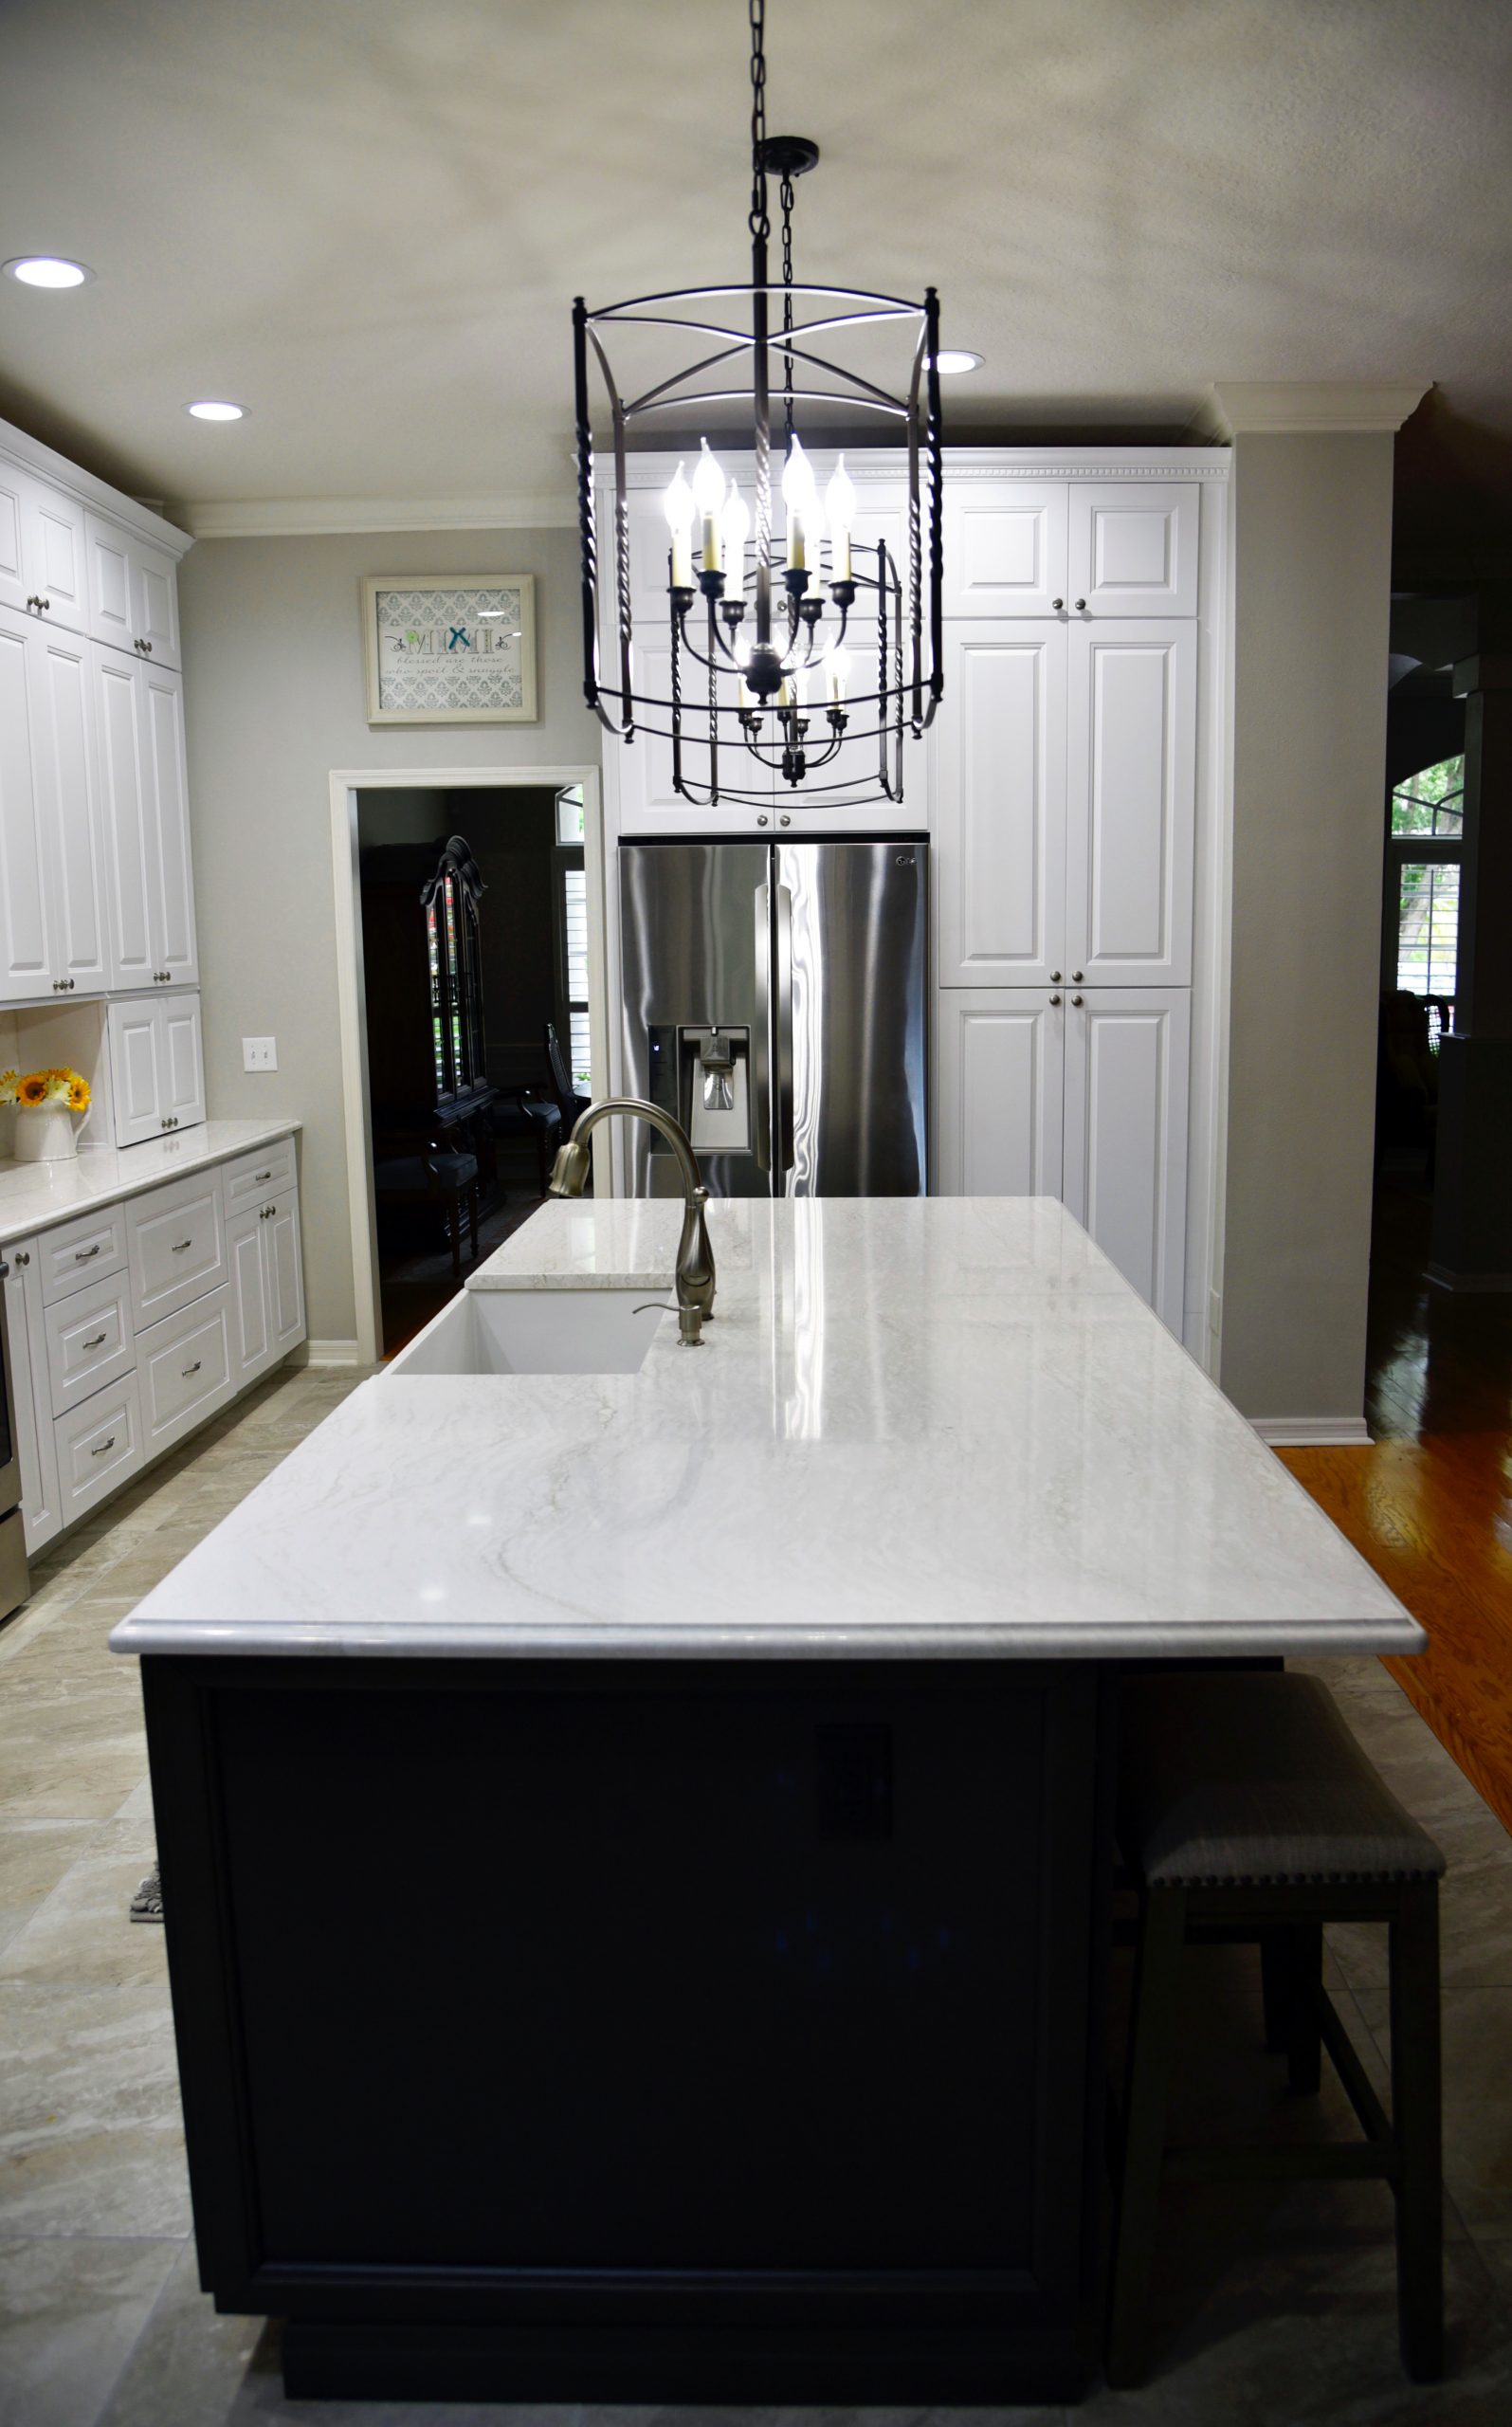 Roberts Ironsbridge Cambria Quartz Kitchen Countertops in West Palm Beach Florida White Cabinets Black Cabinets Island Stainless Steel Appliances White Cast Iron Farmhouse Sink Caged Pendant Lights